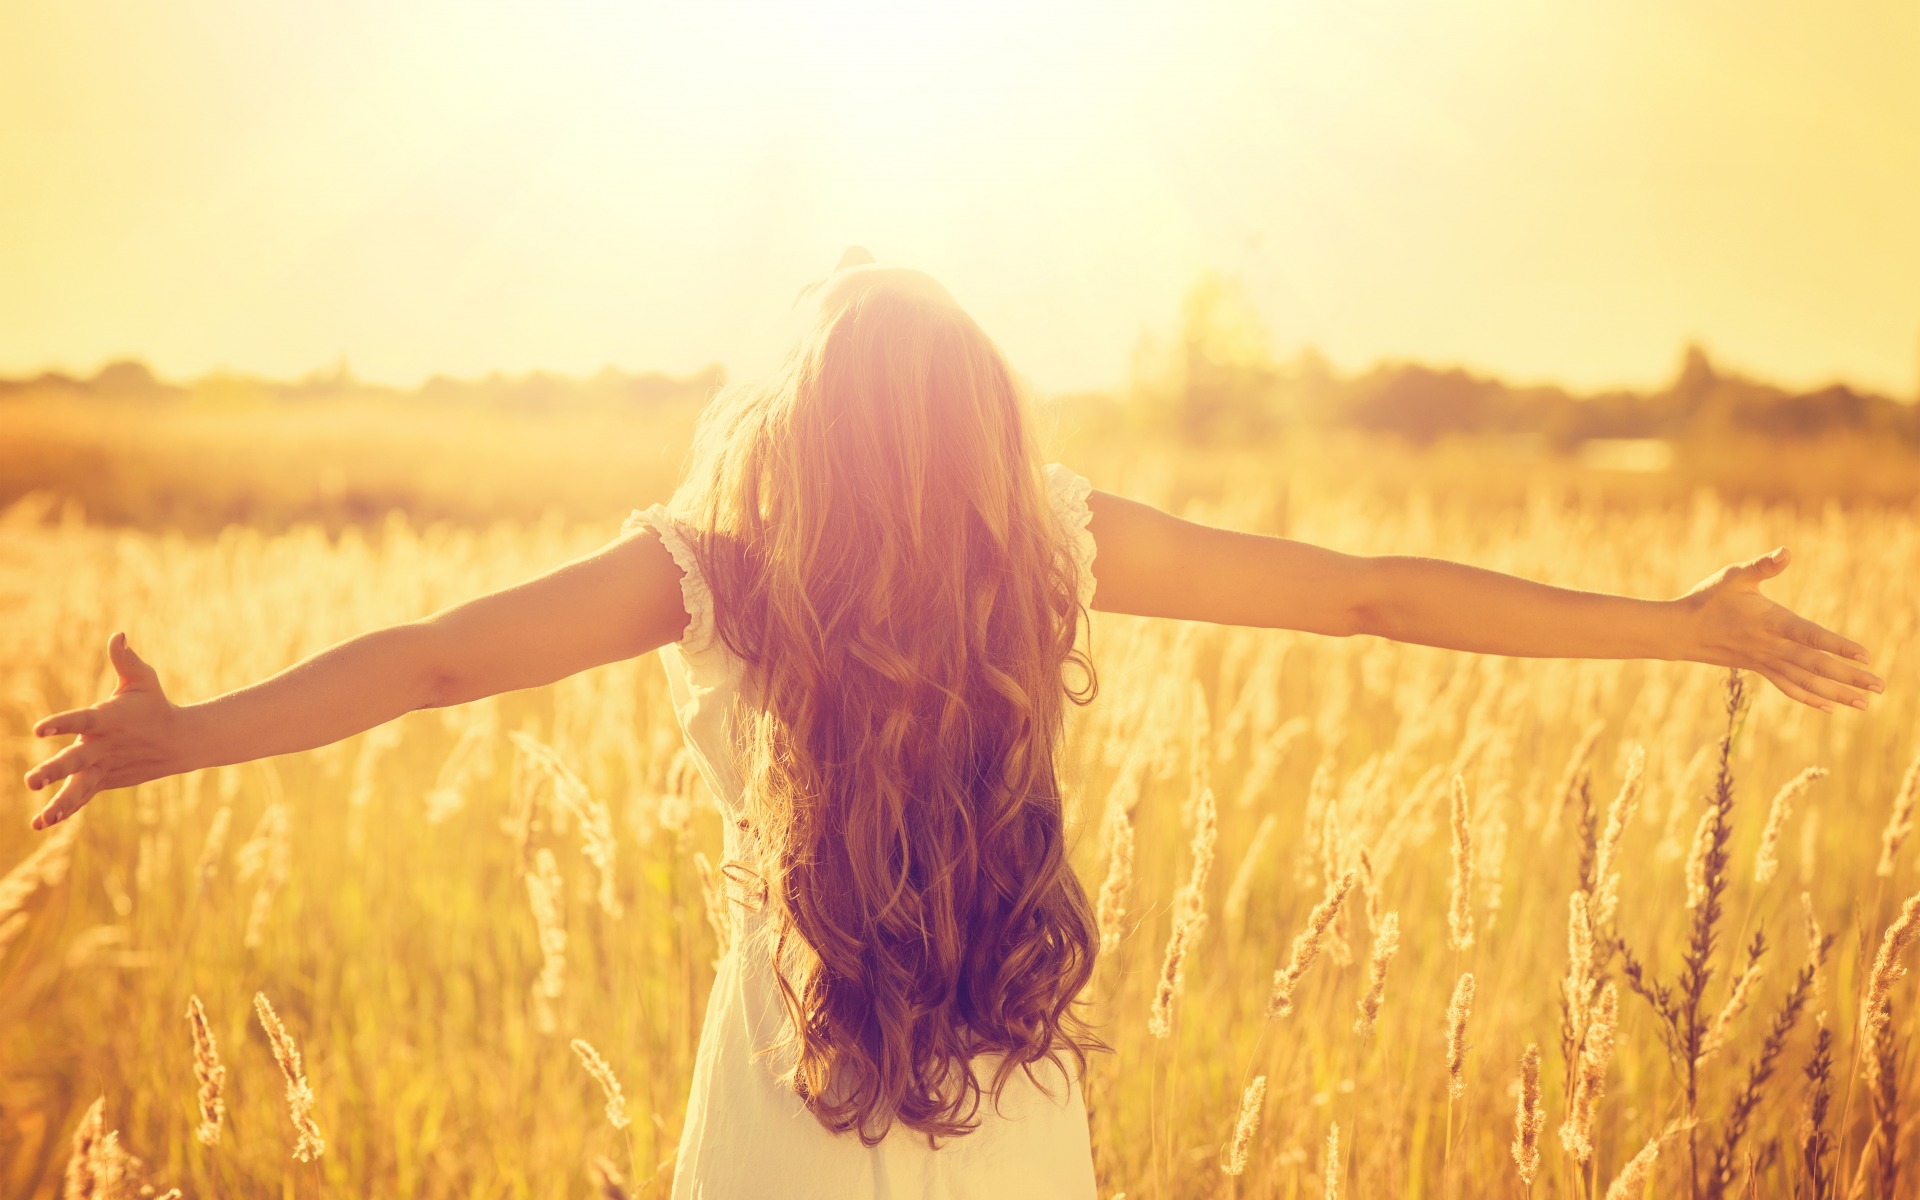 a-beautiful-girl-with-very-curl-long-hair-standing-on-the-wheat-field-in-sunshine-her-outstretched-arms-enjoys-the-freedom.jpg